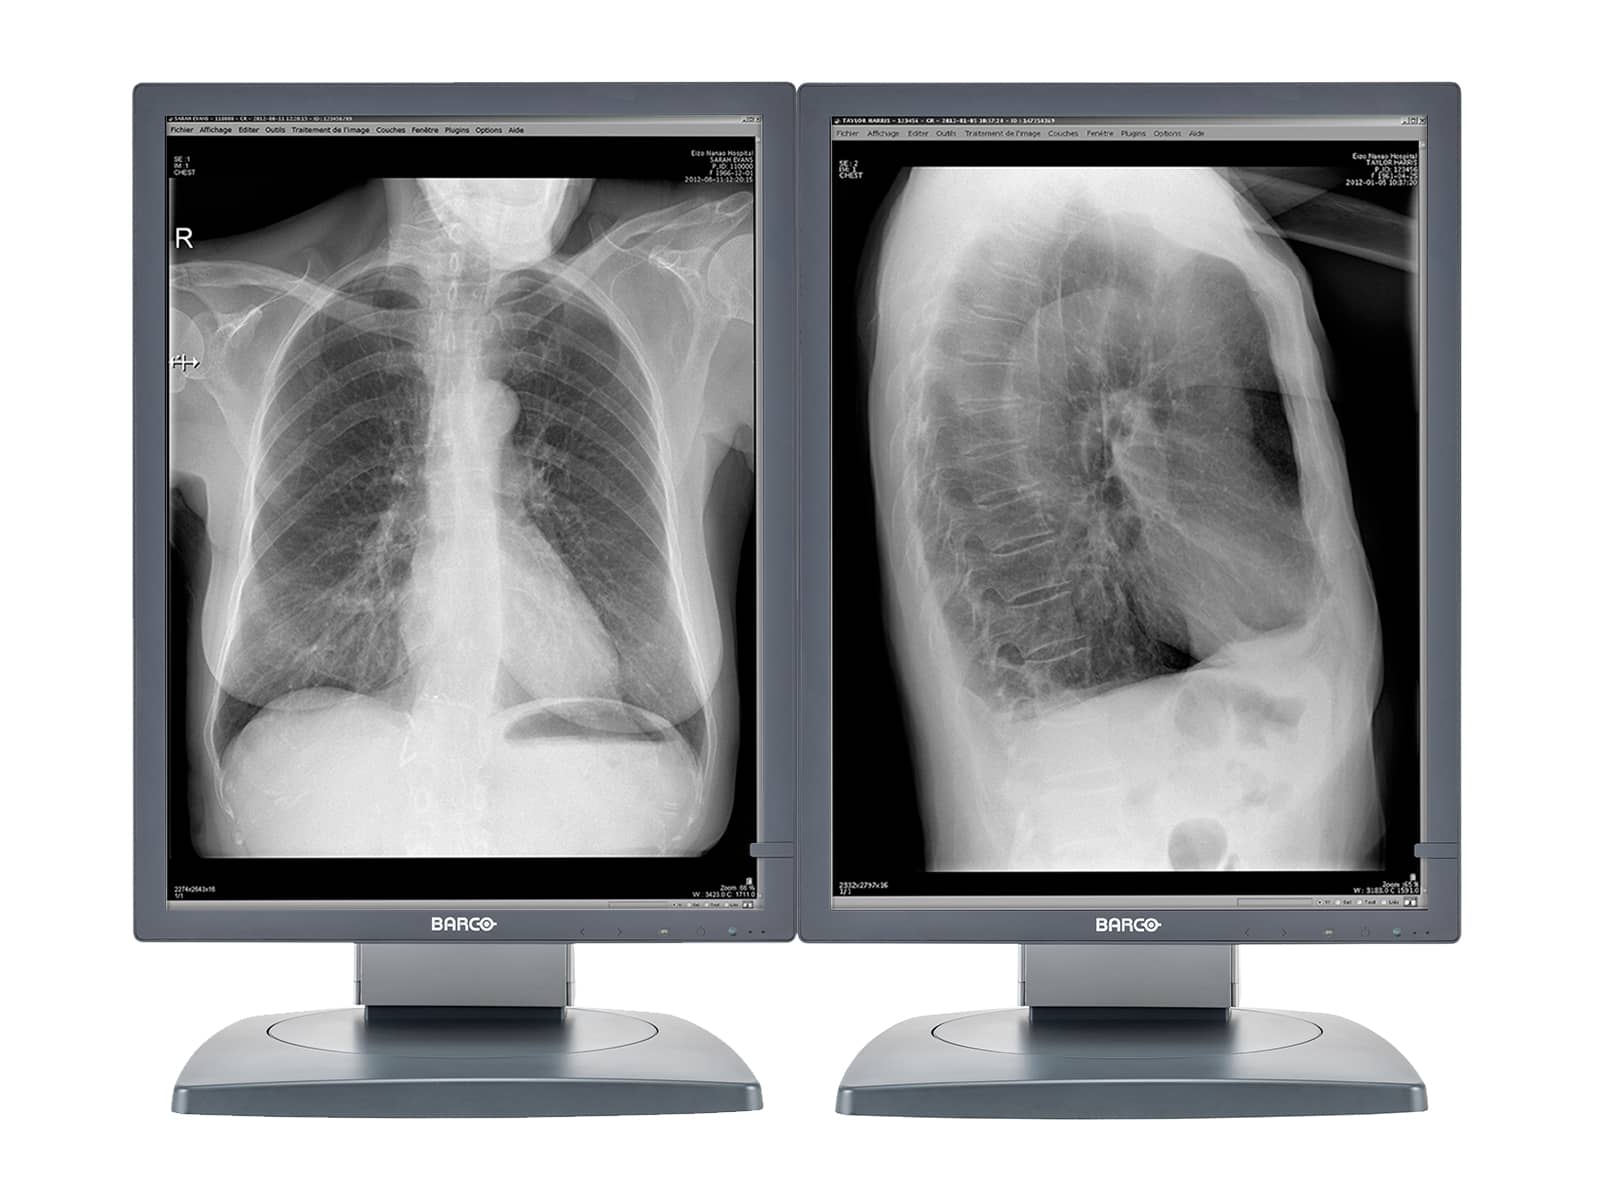 Barco Coronis MDCG-3120 21" Grayscale General Radiology Diagnostic Display (K9601662) Monitors.com 